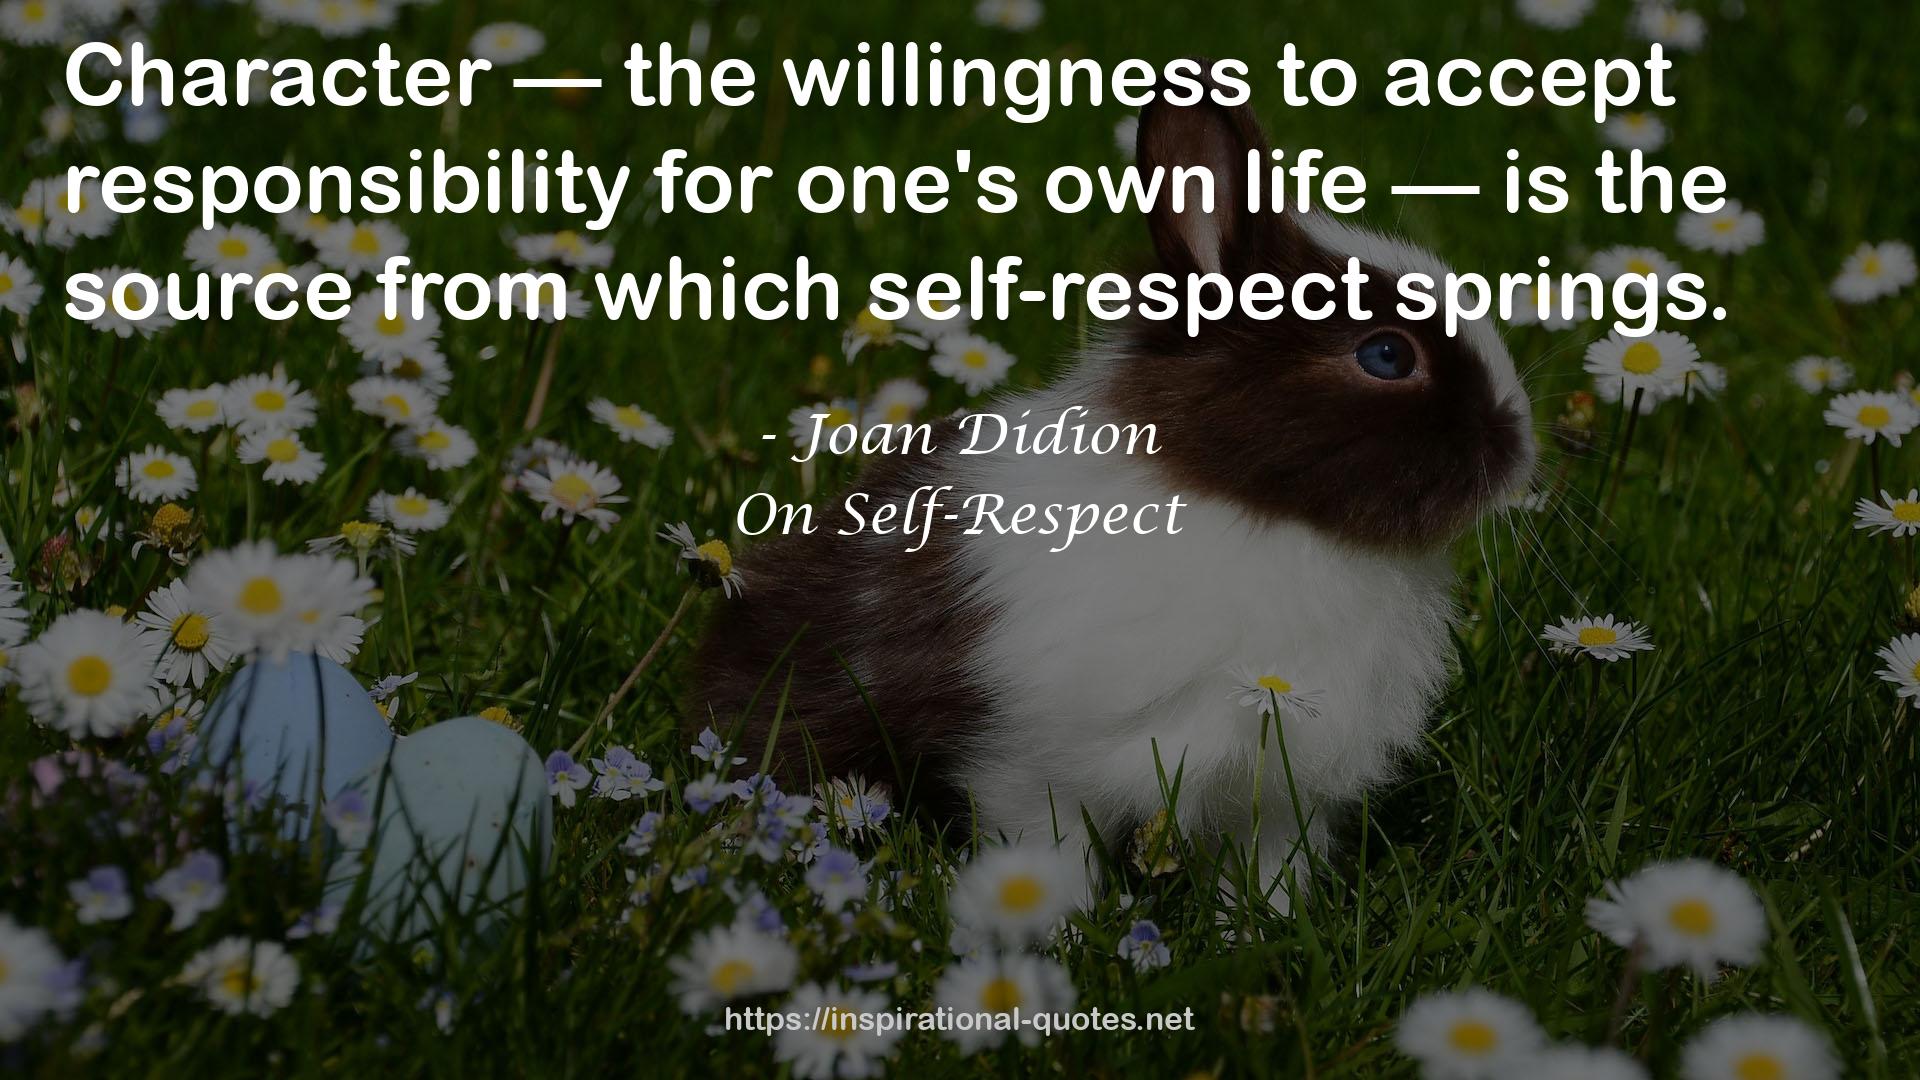 On Self-Respect QUOTES